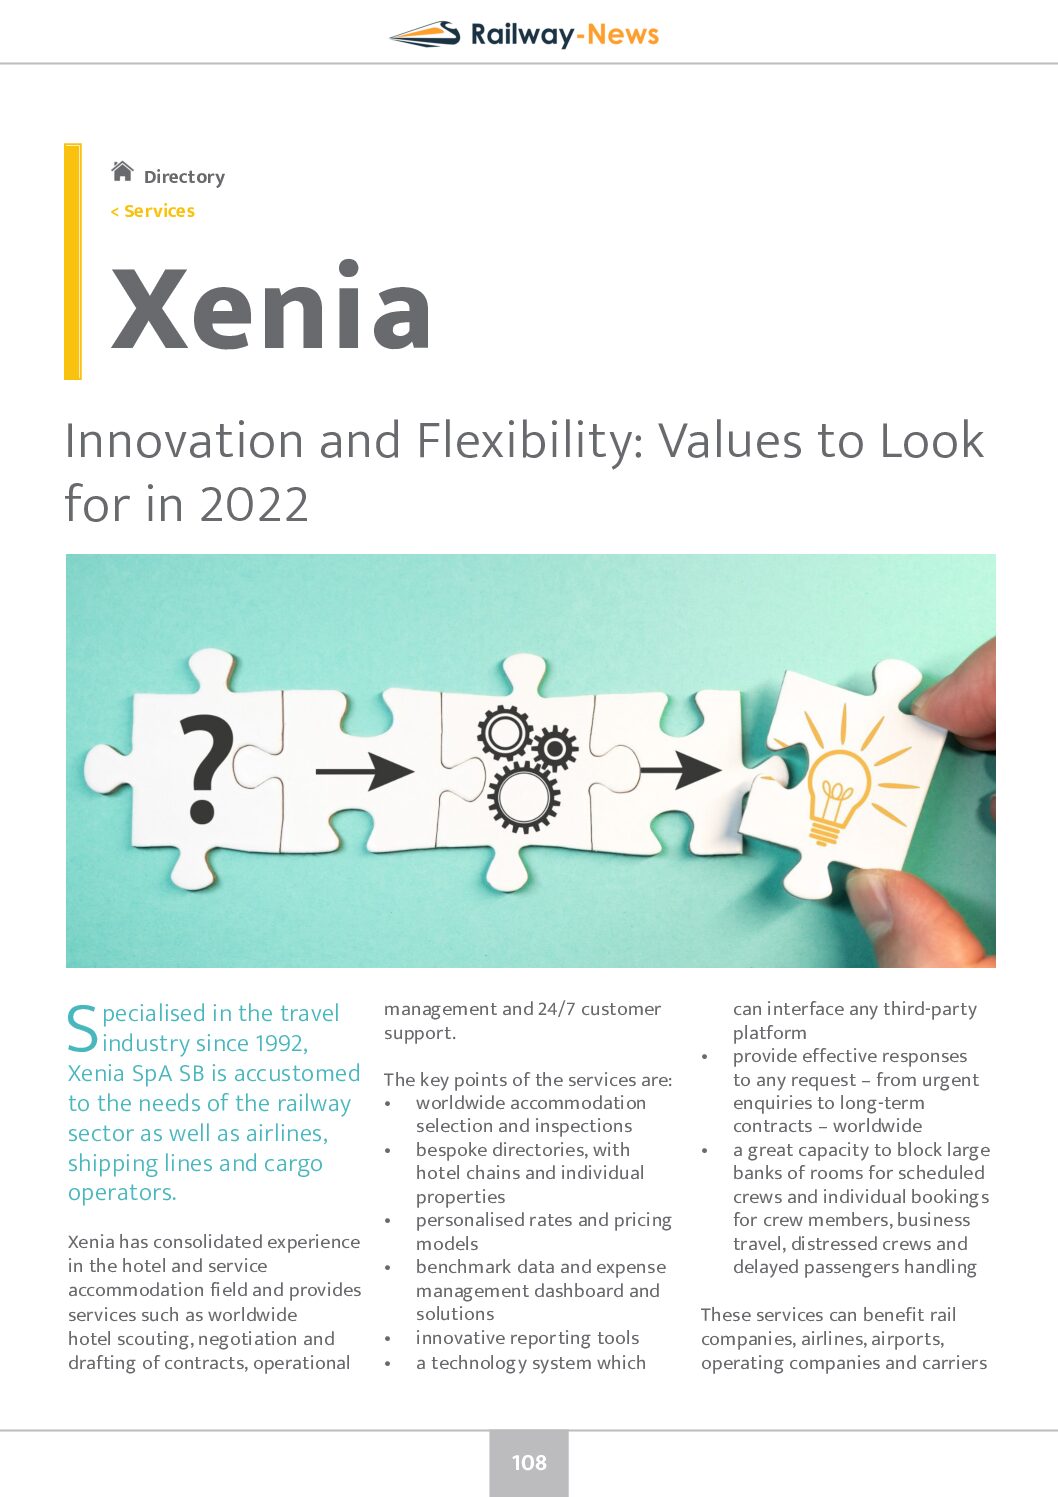 Crew Services Innovation and Flexibility: Values to Look for in 2022